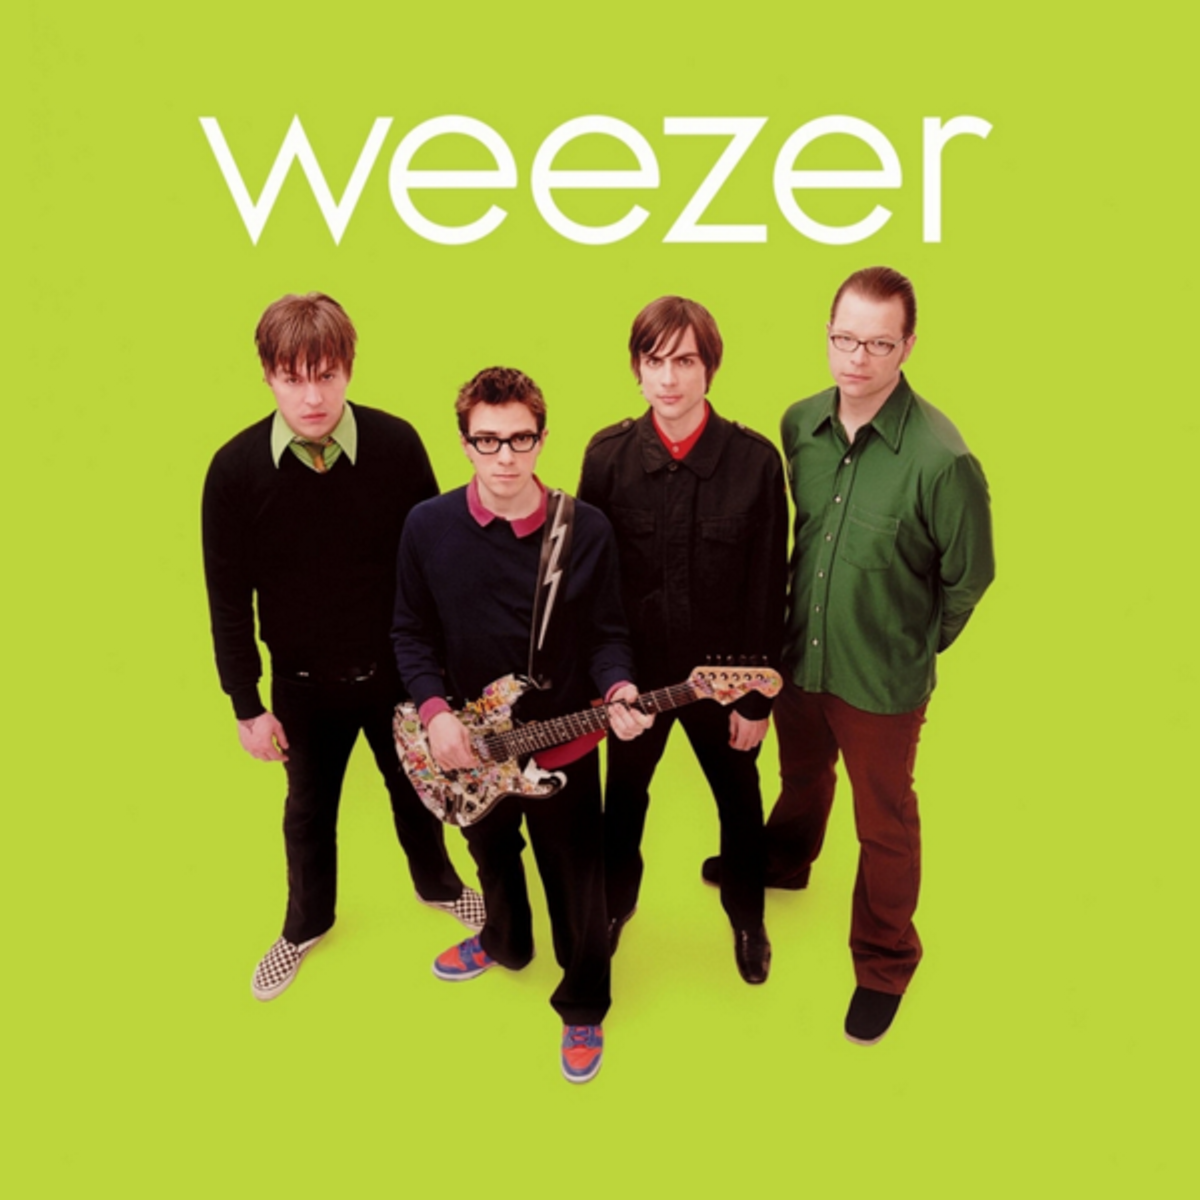 What's Wrong With Weezer?